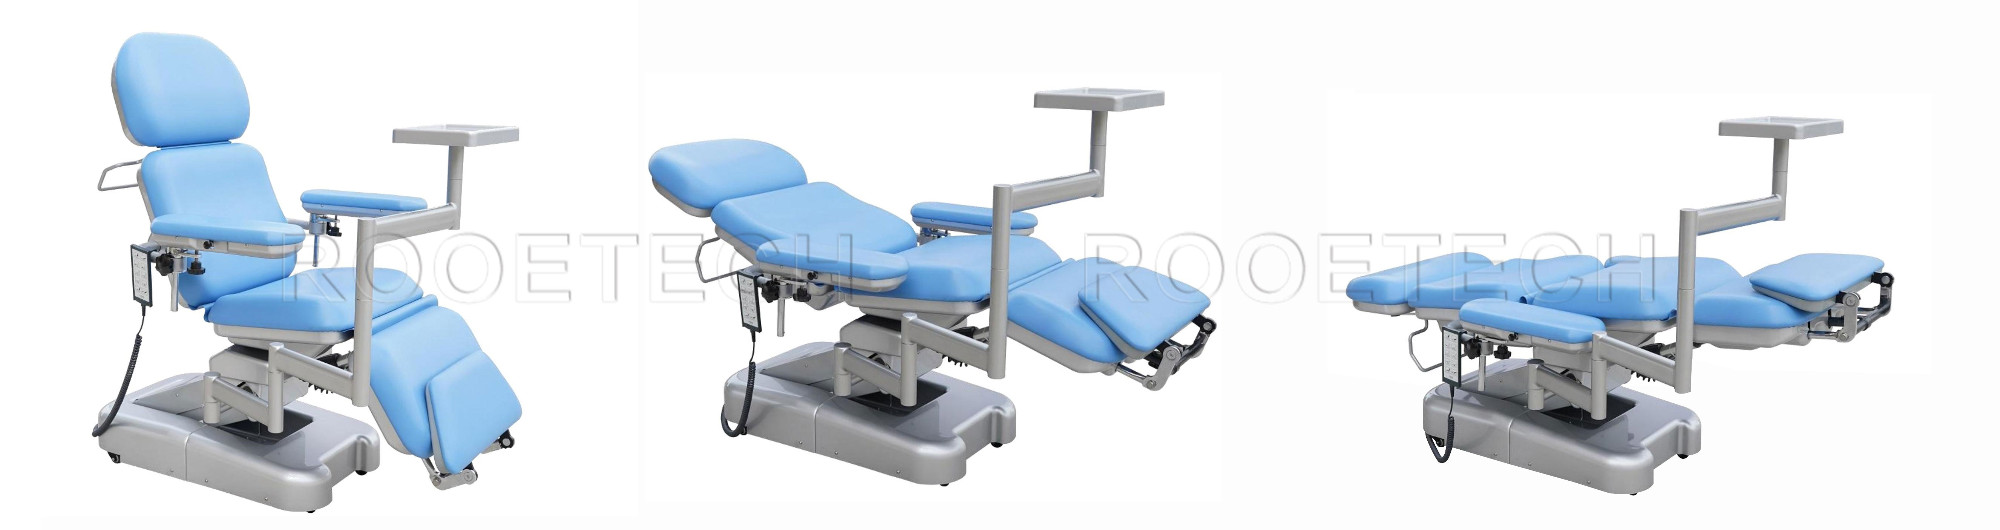 hospital recliner chair, reclining phlebotomy chair, adjustable phlebotomy chair, dermatology chair